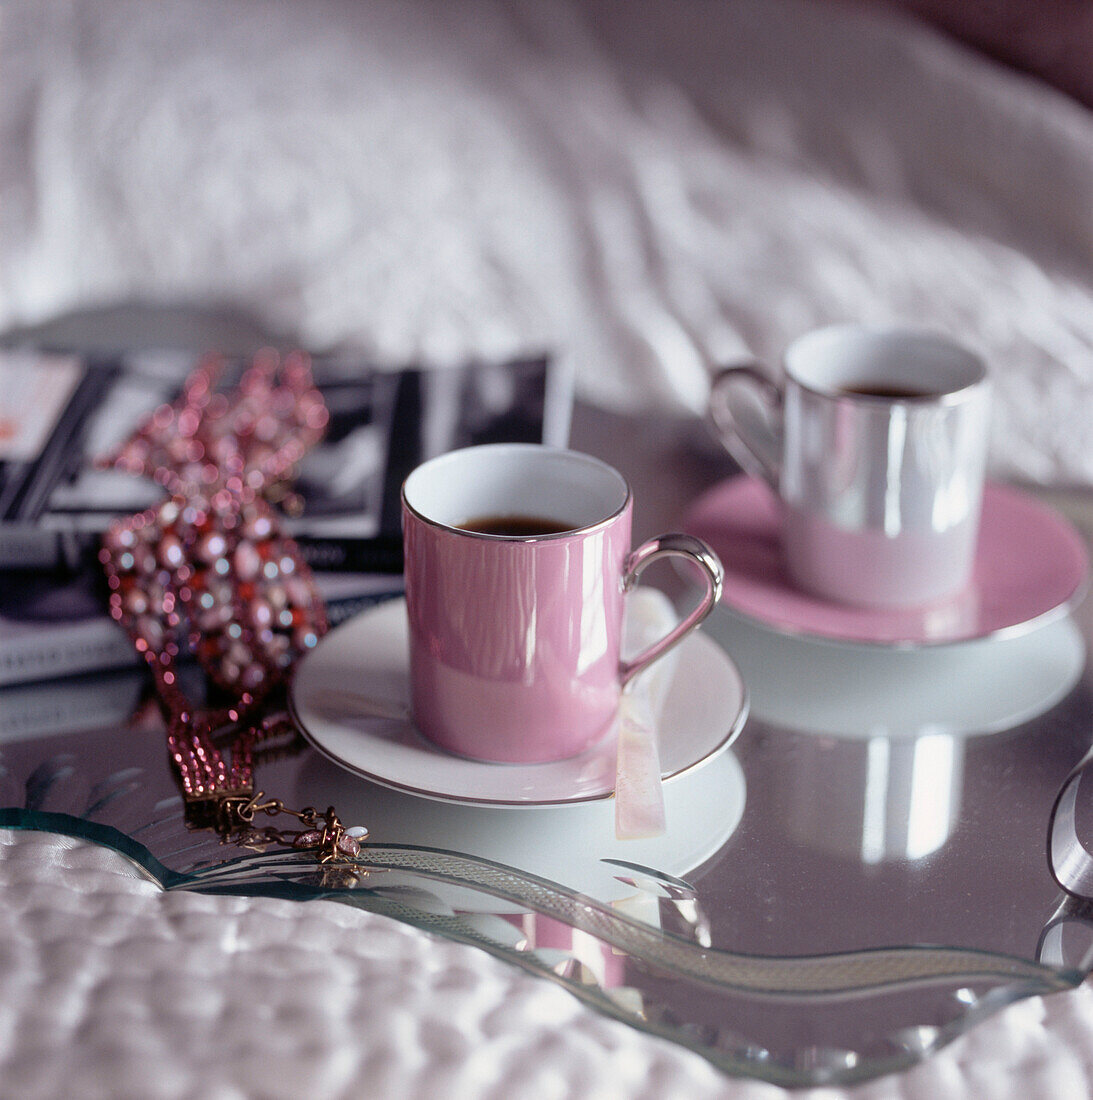 Tow pink coffee cups on a mirrored tray resting on top of a bed